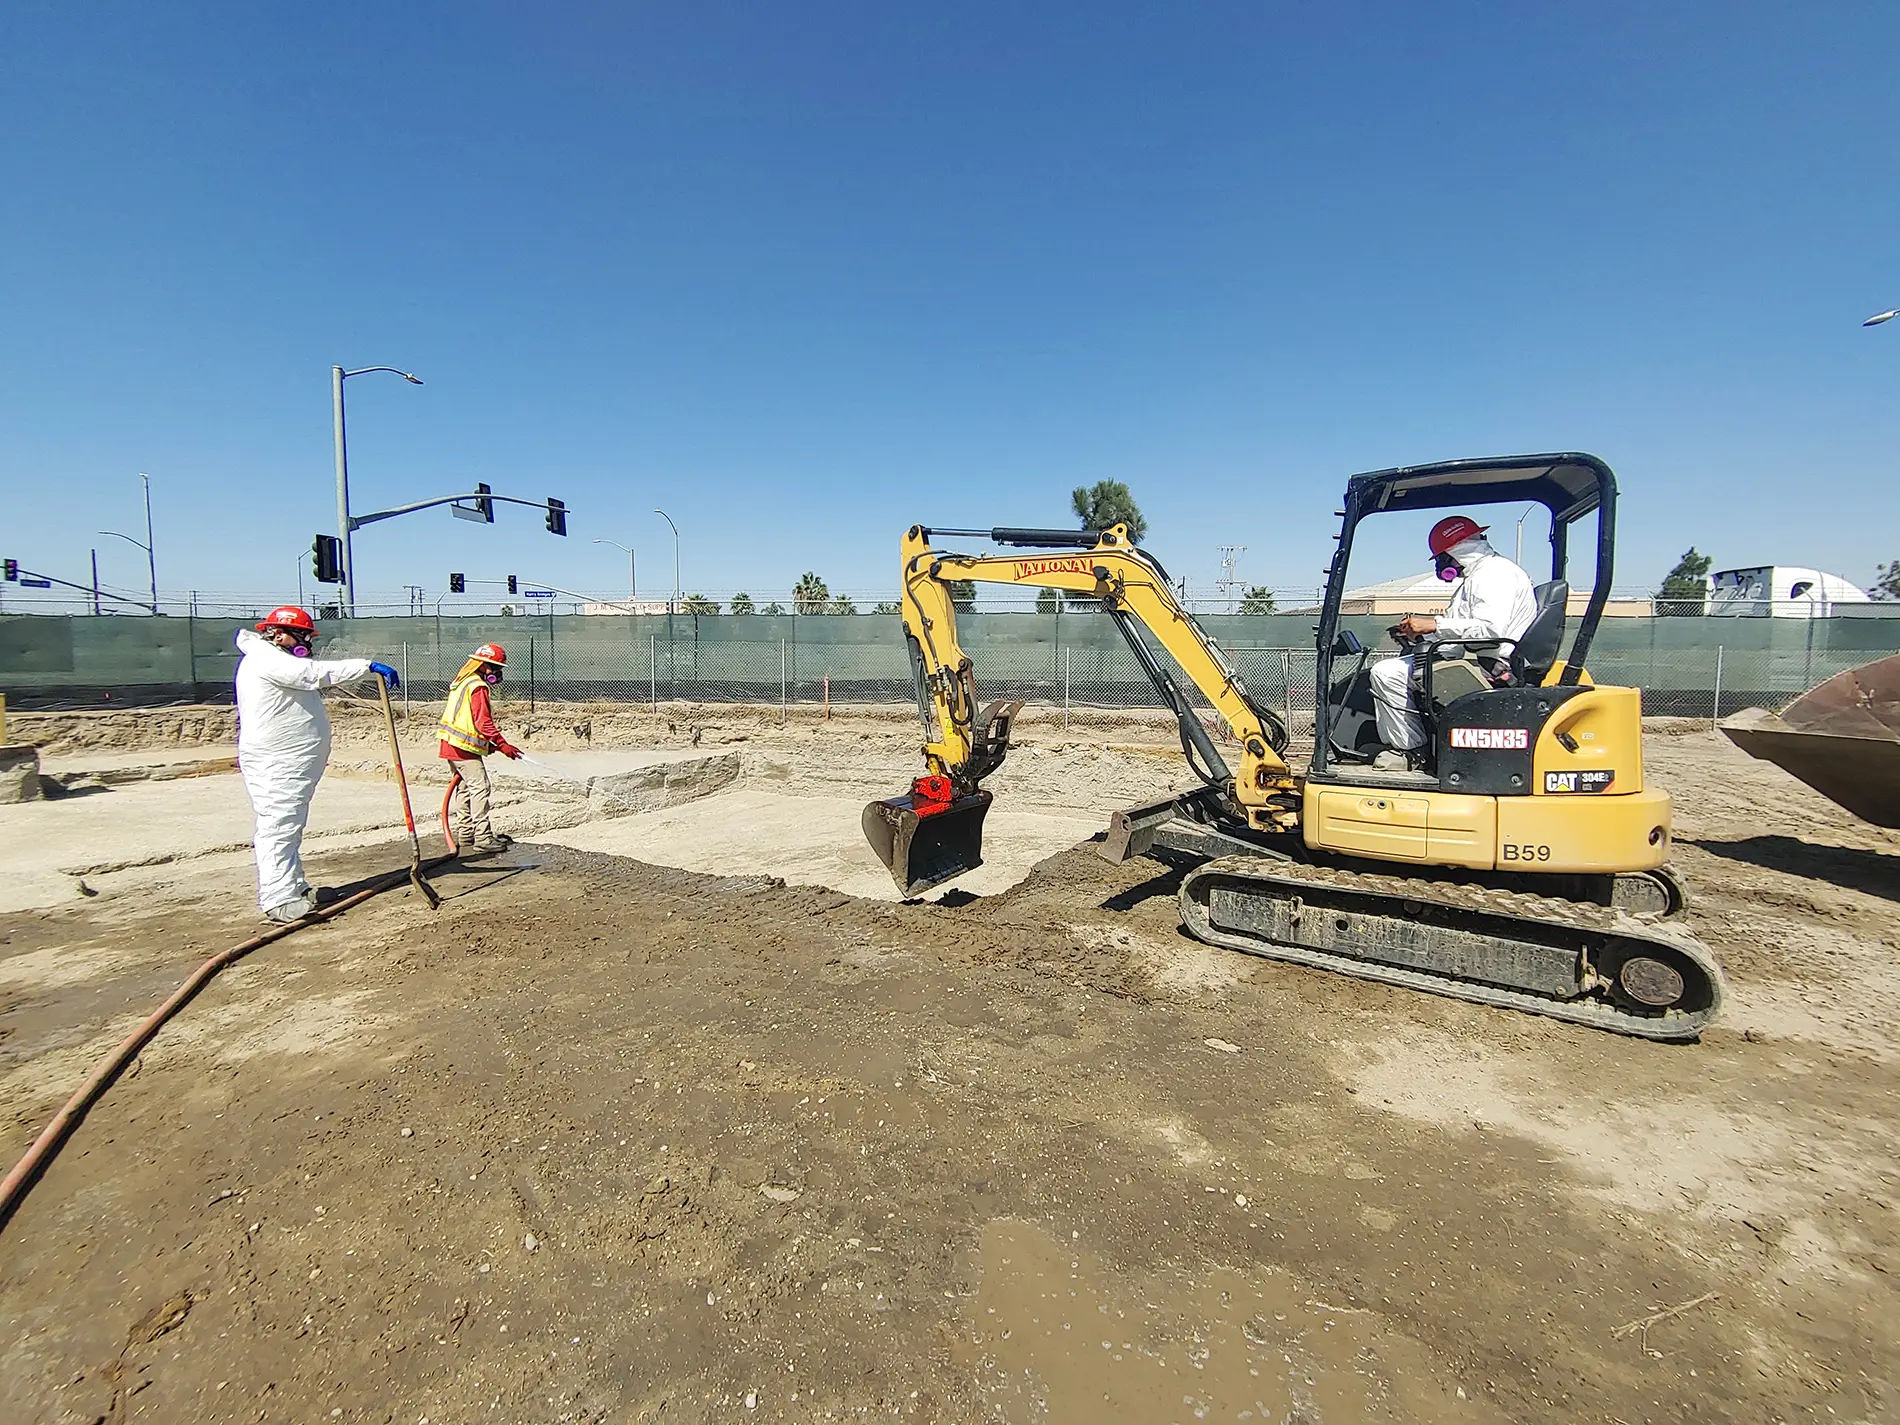 Apex team operating an excavator to during hot spot soil removal action and excavation at the contaminated Port of Los Angeles Avalon Triangle parcel.